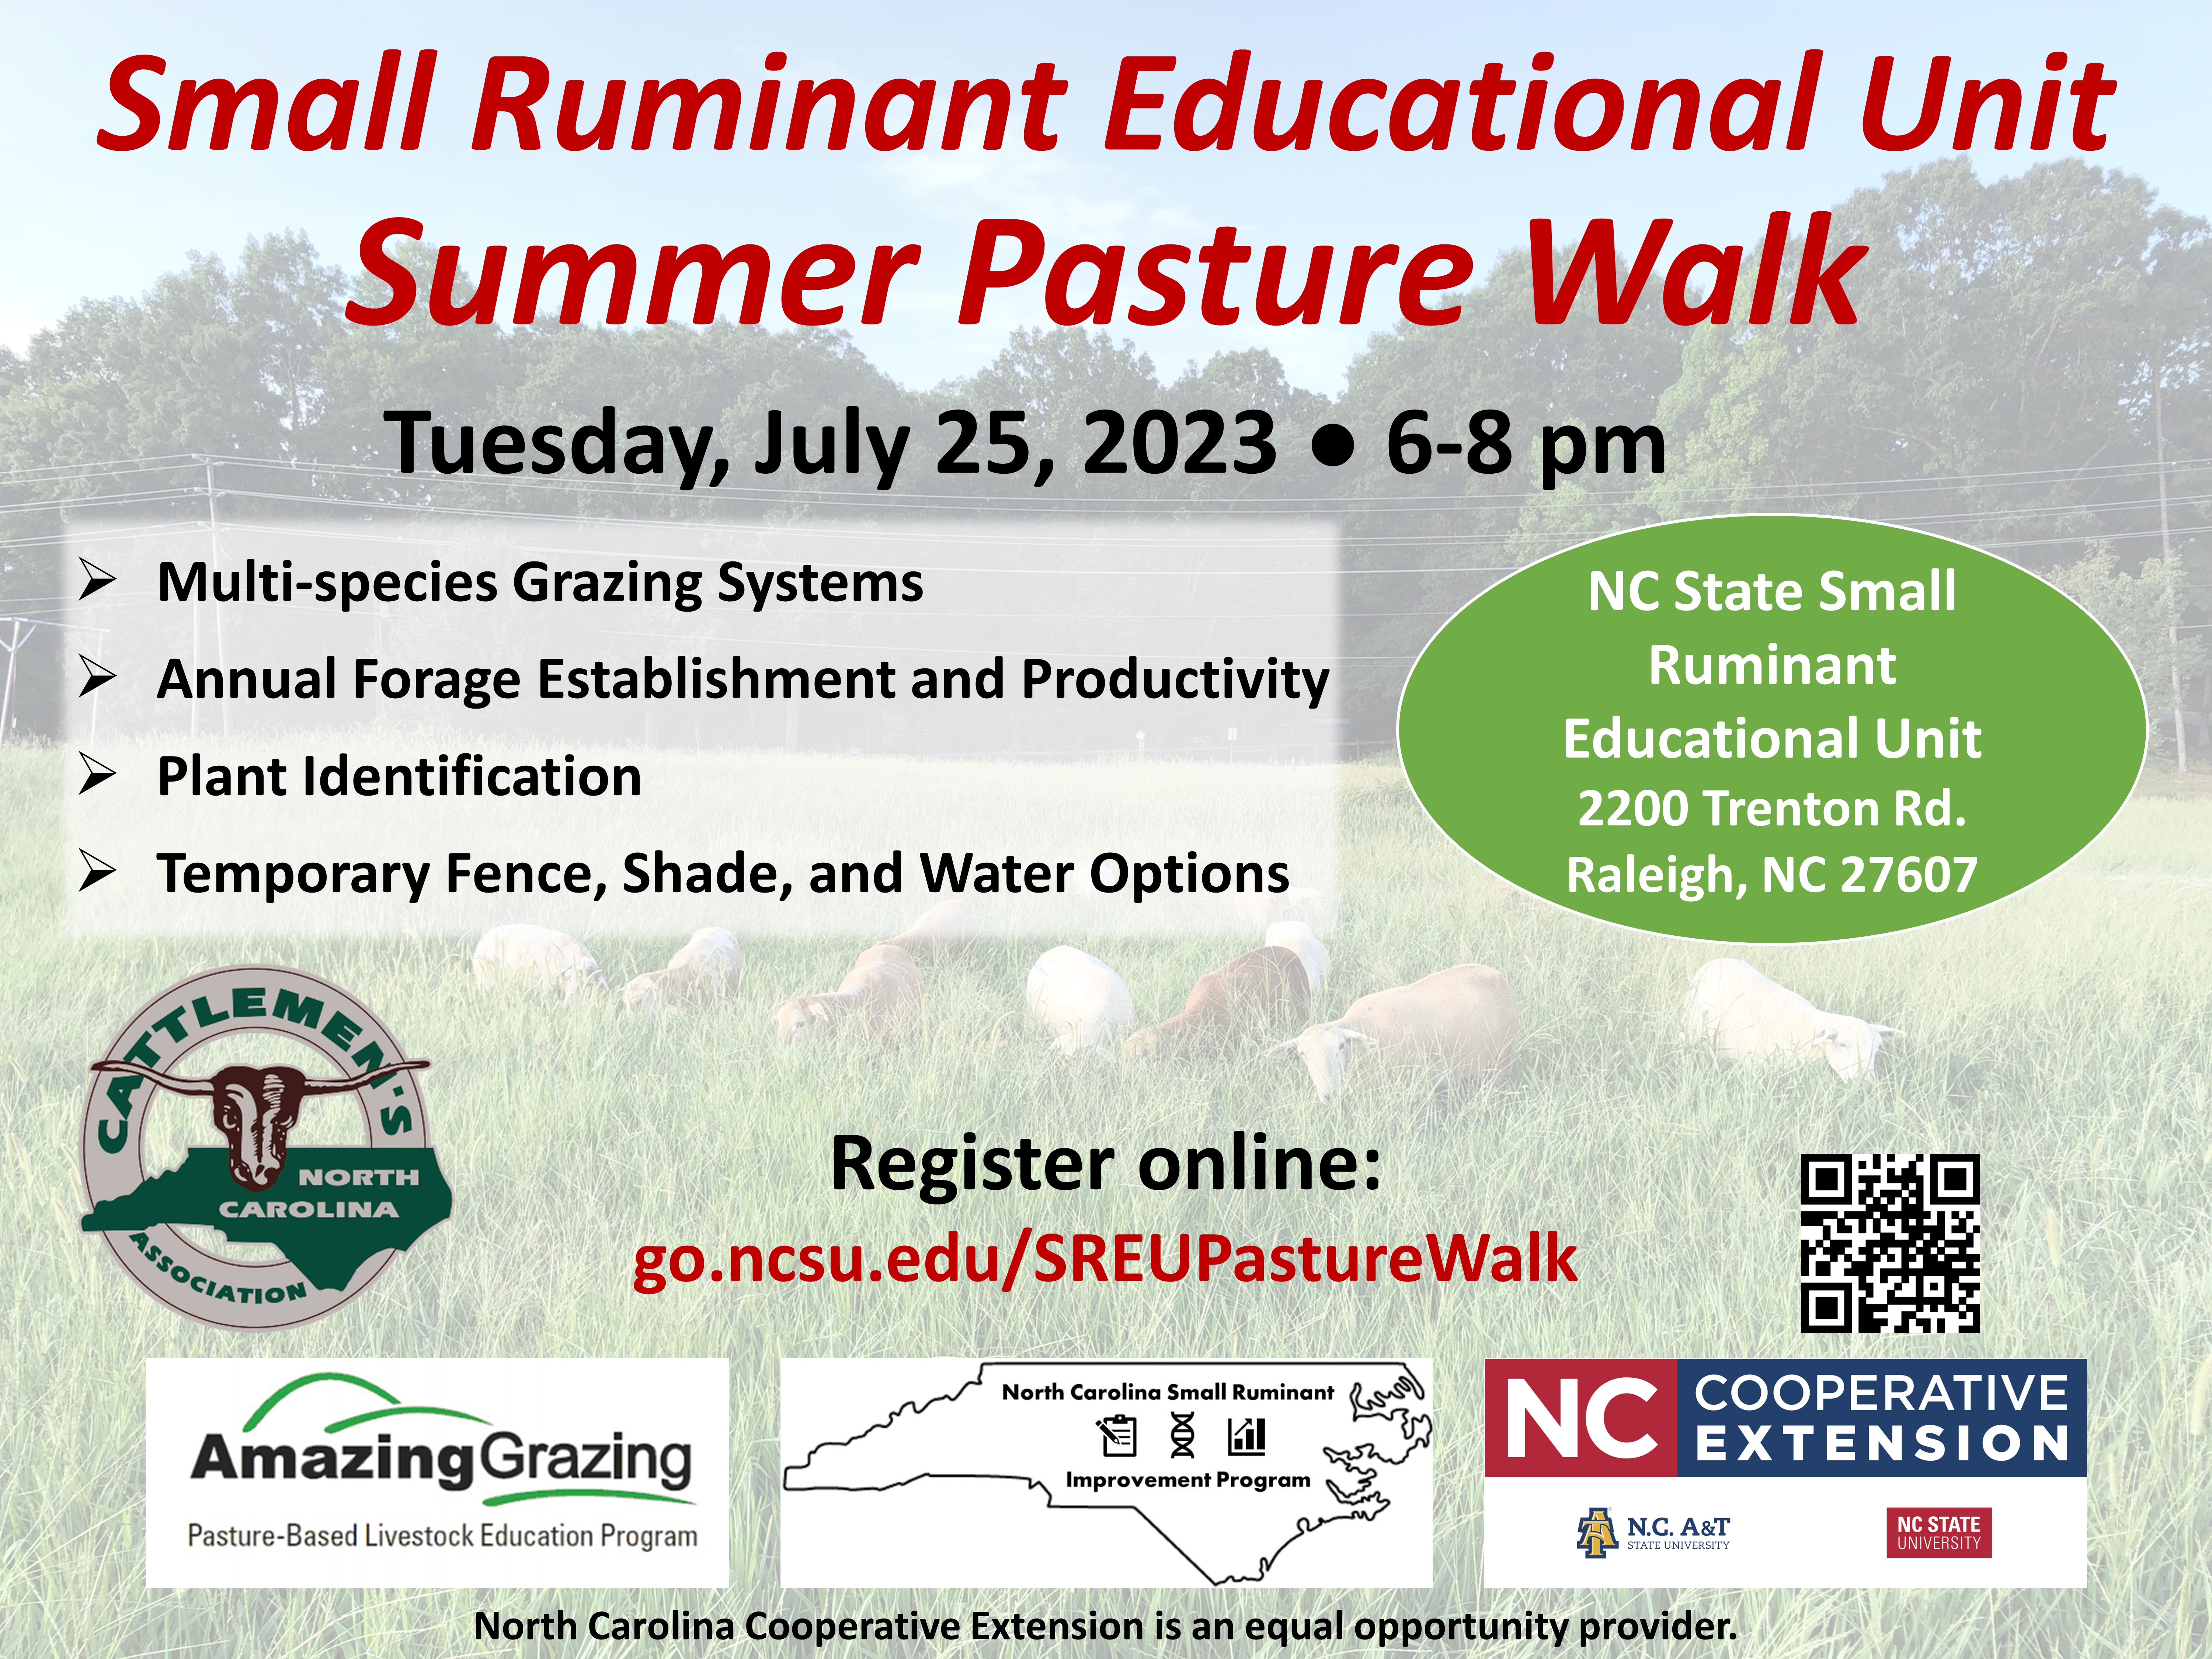 Small Ruminant Educational Unit Summer Pasture Walk Tuesday, July 25, 2023 6-8 p.m. Multi-species Grazing Systems Annual Forage Establishment and Productivity Plant Identification ➤ Temporary Fence, Shade, and Water Options NC State Small Ruminant Educational Unit 2200 Trenton Rd. Raleigh, NC 27607